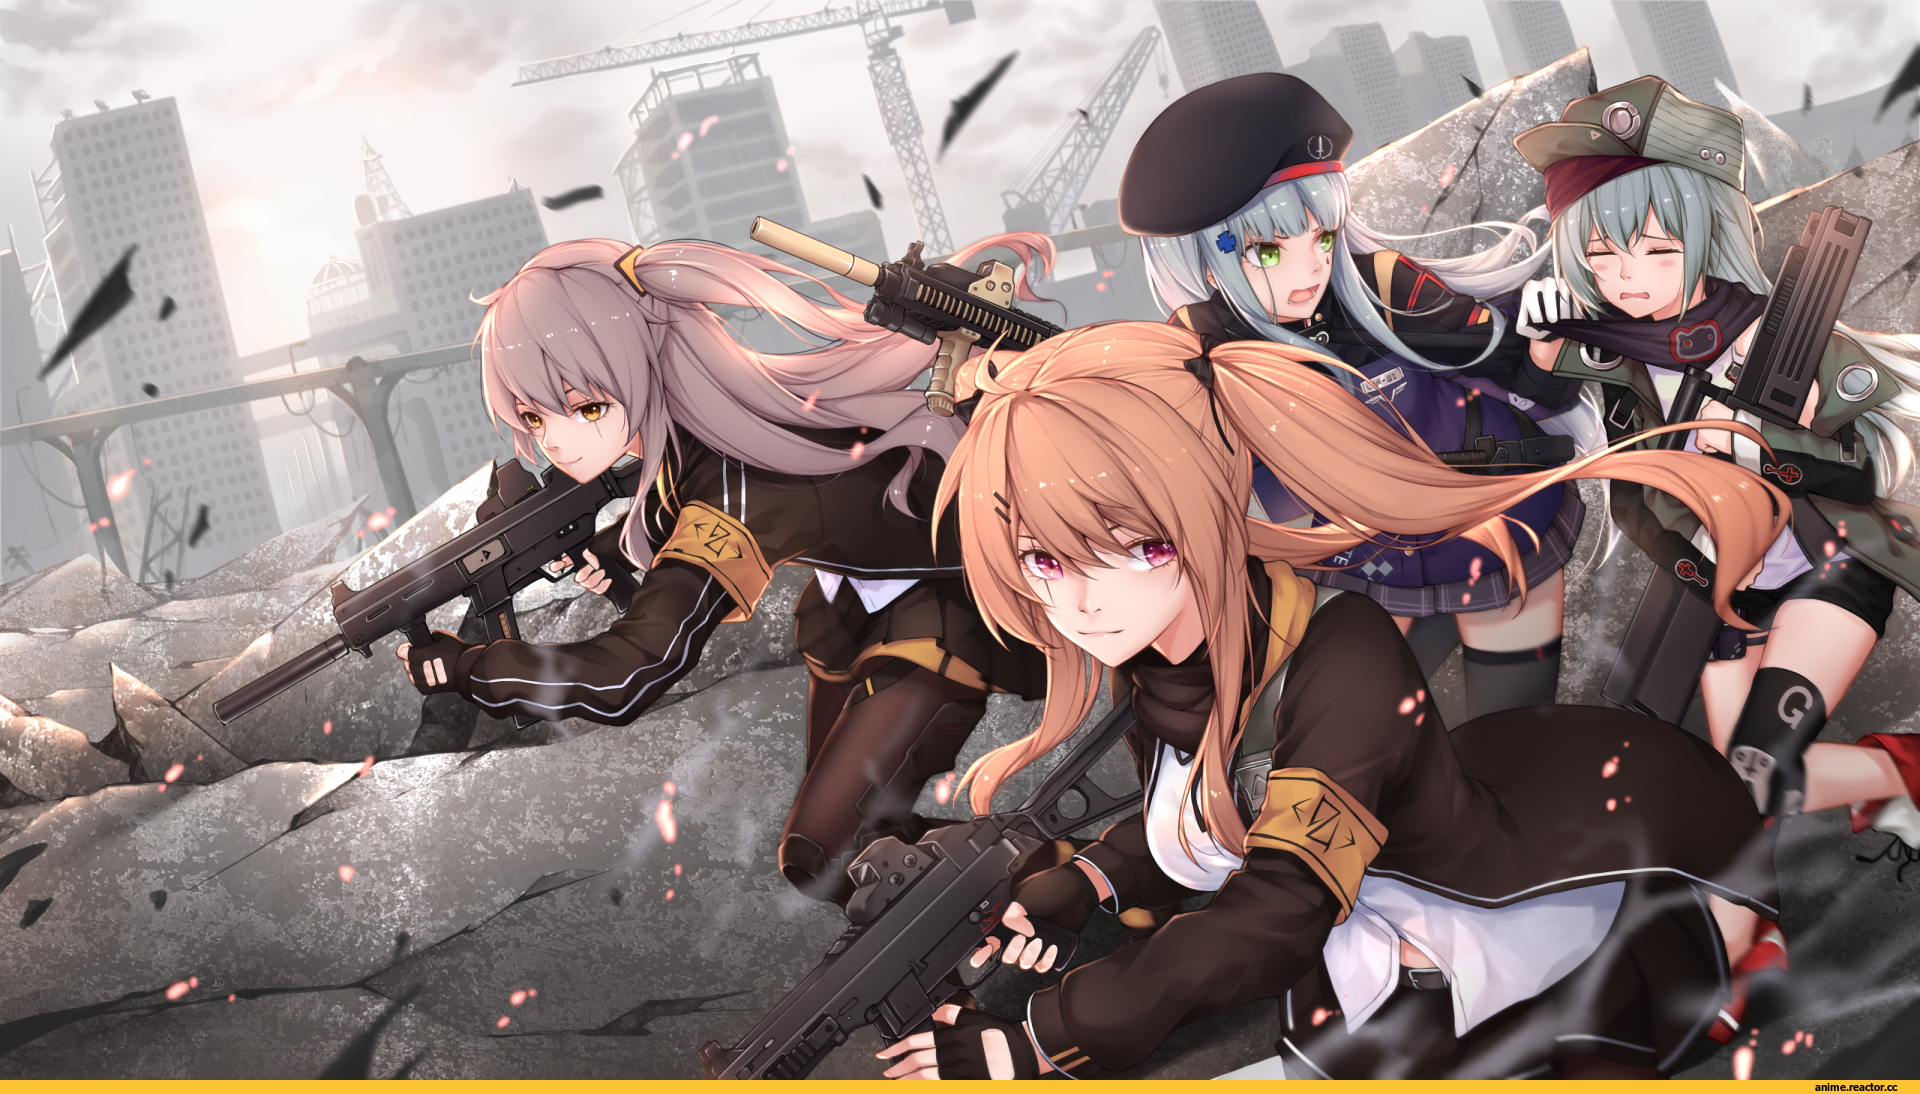 G11 And Hk416 Girls Frontline Wallpapers